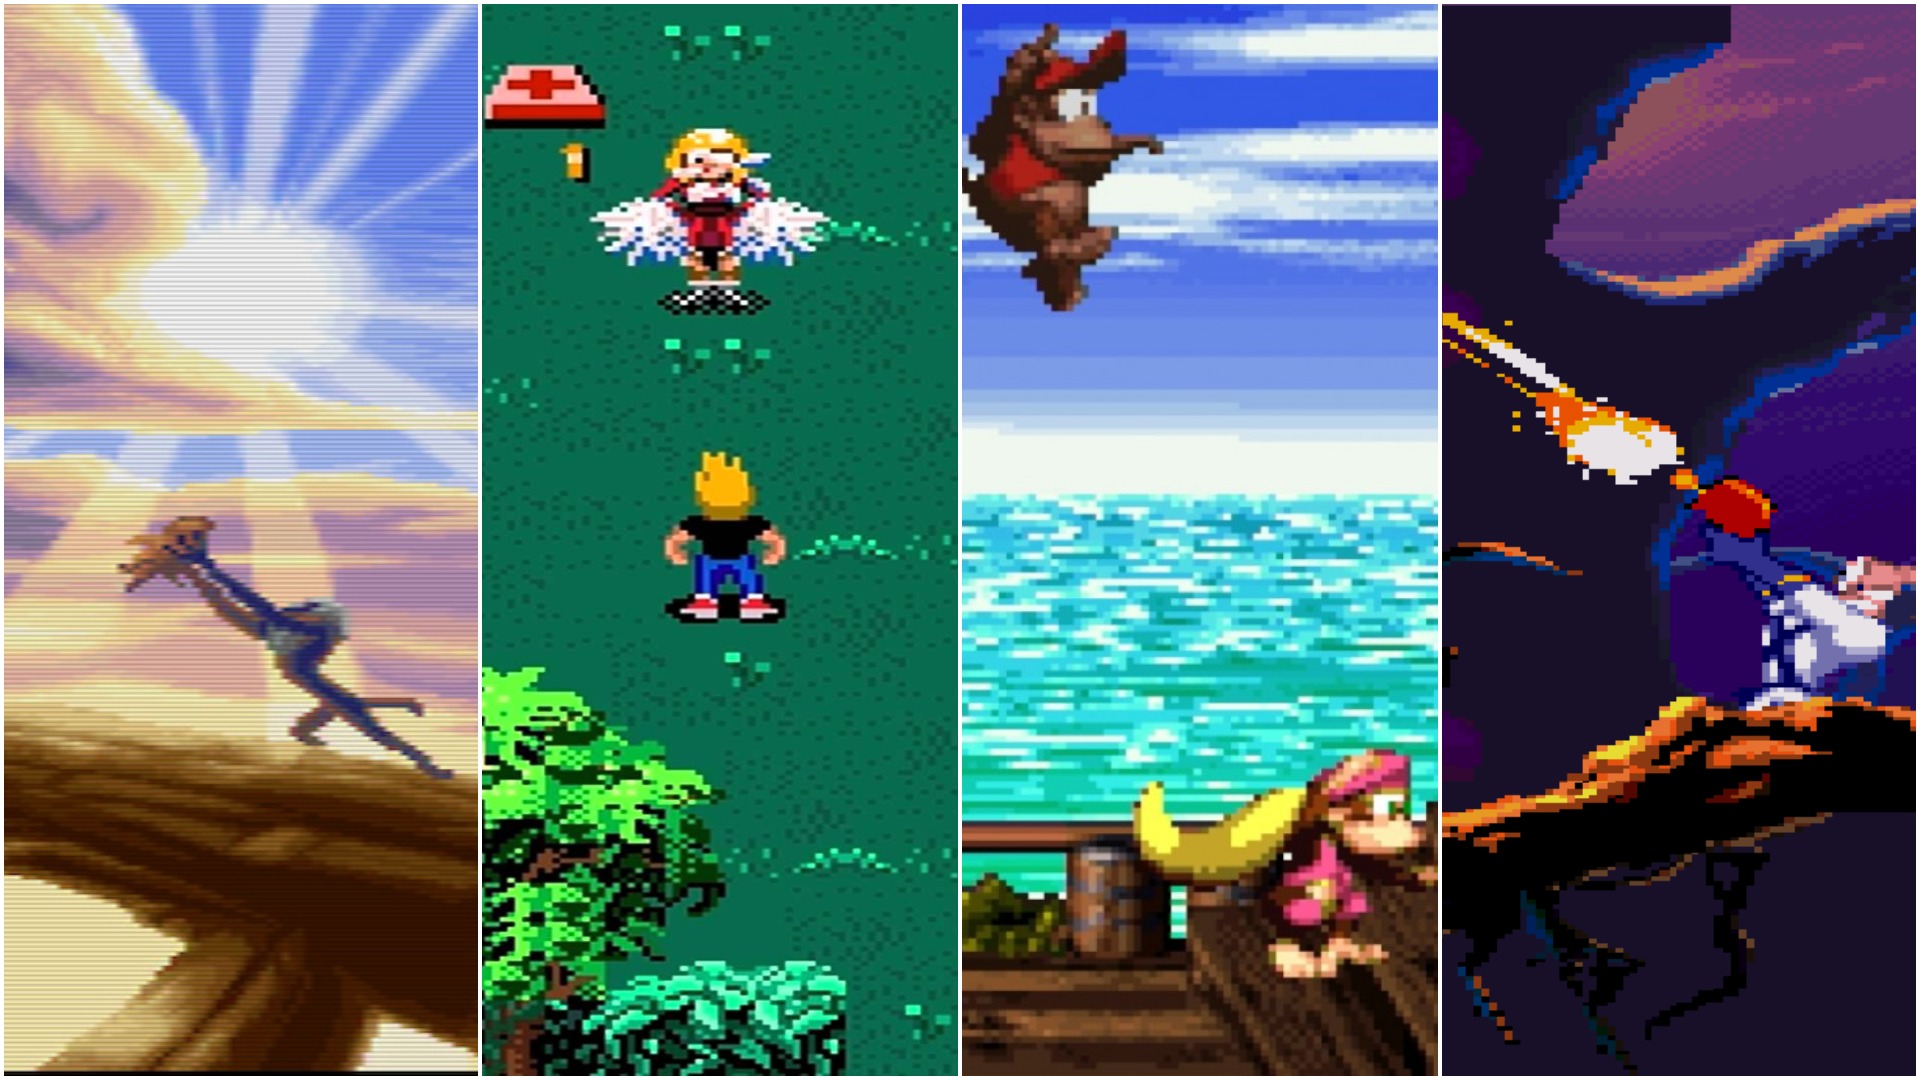 The 25 hardest video games of all time, Games